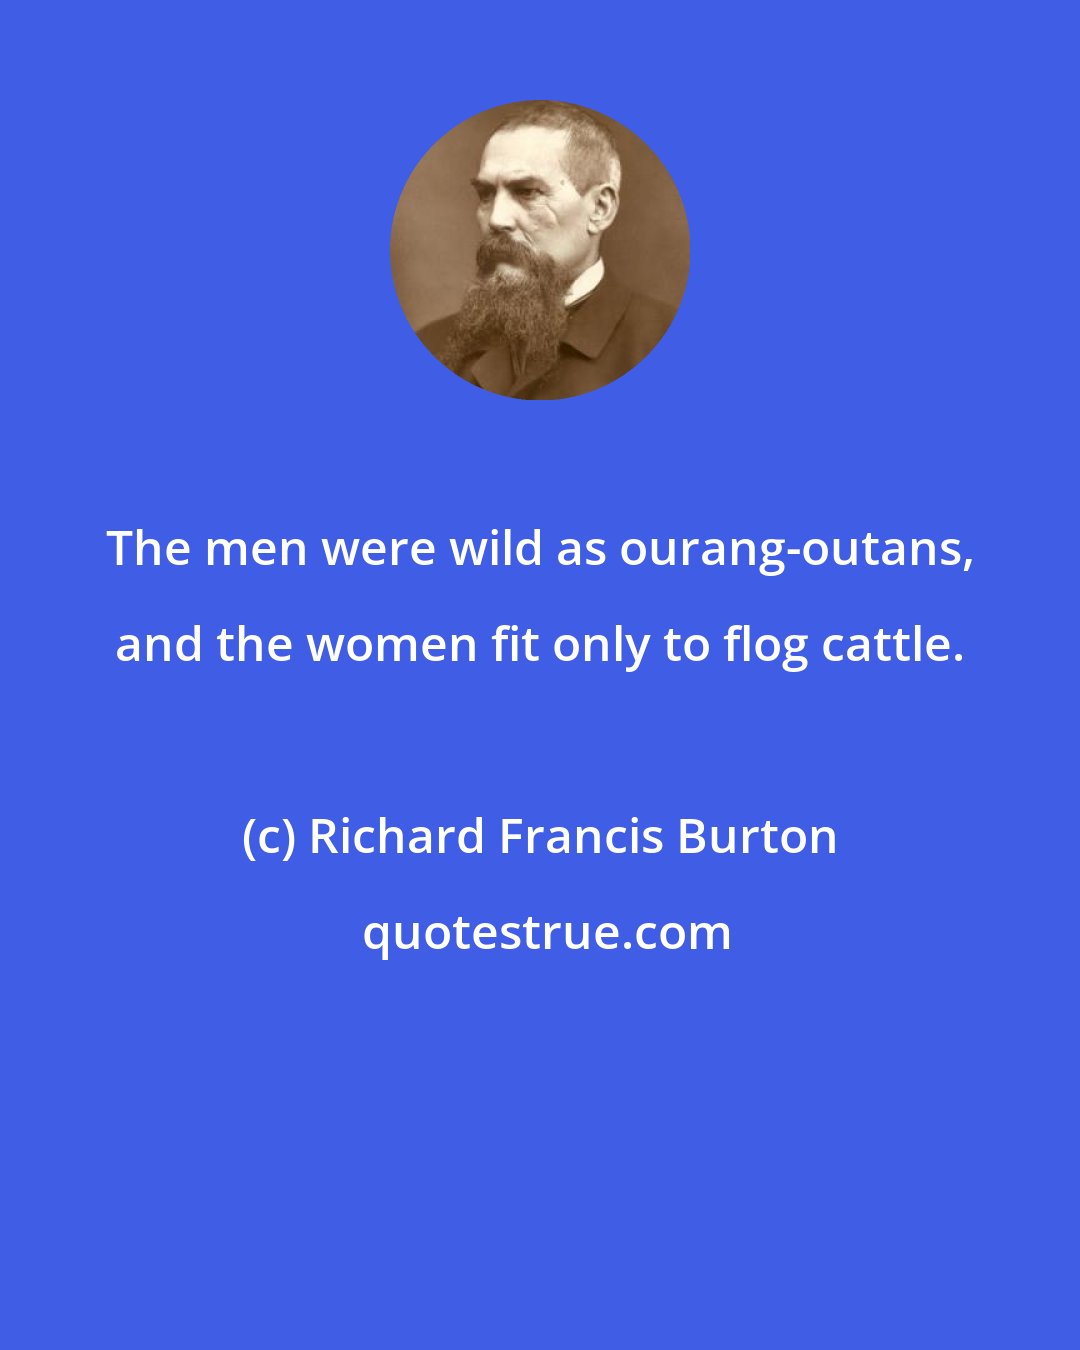 Richard Francis Burton: The men were wild as ourang-outans, and the women fit only to flog cattle.